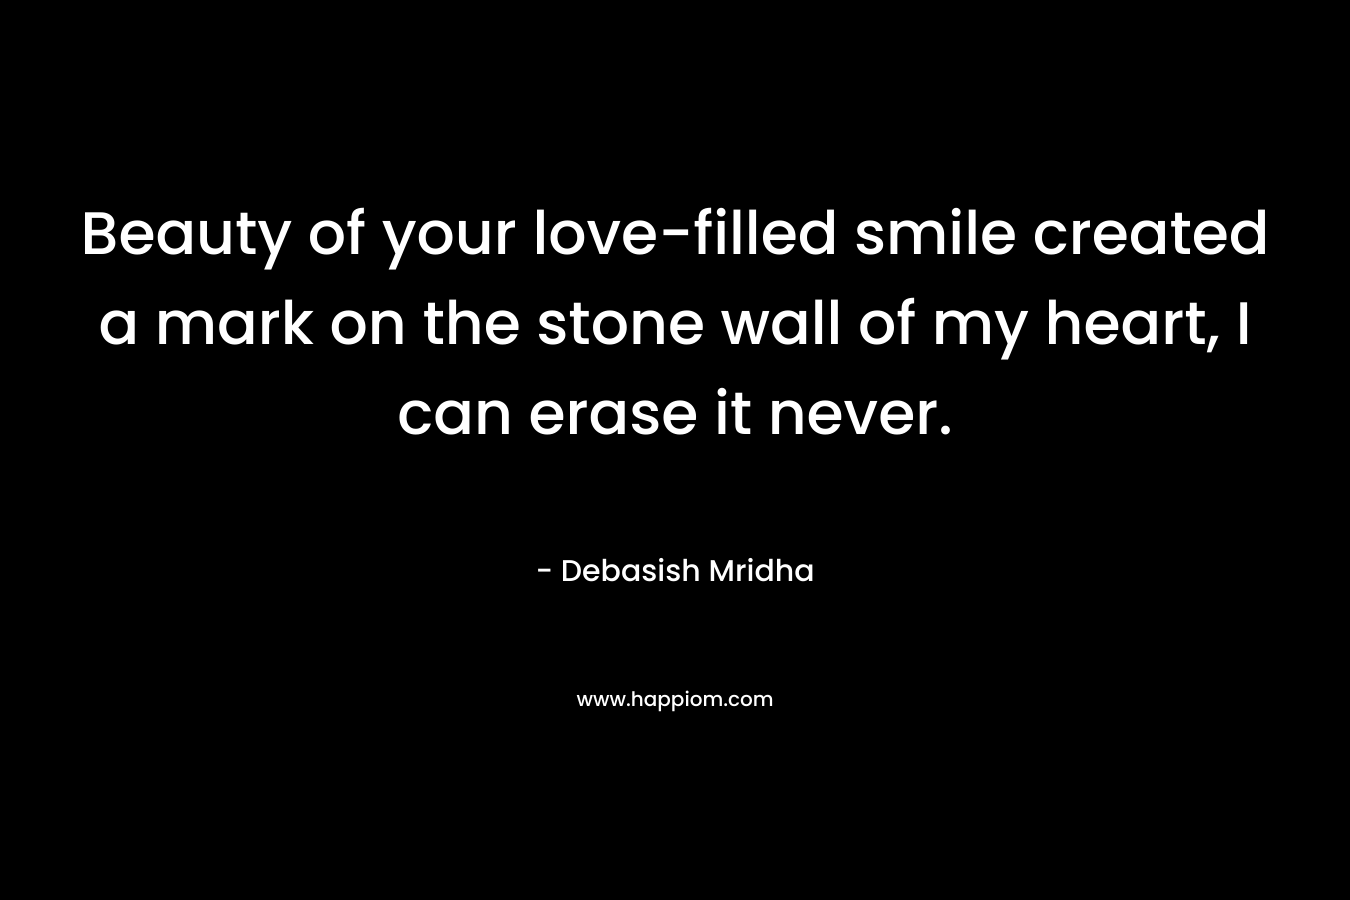 Beauty of your love-filled smile created a mark on the stone wall of my heart, I can erase it never. – Debasish Mridha